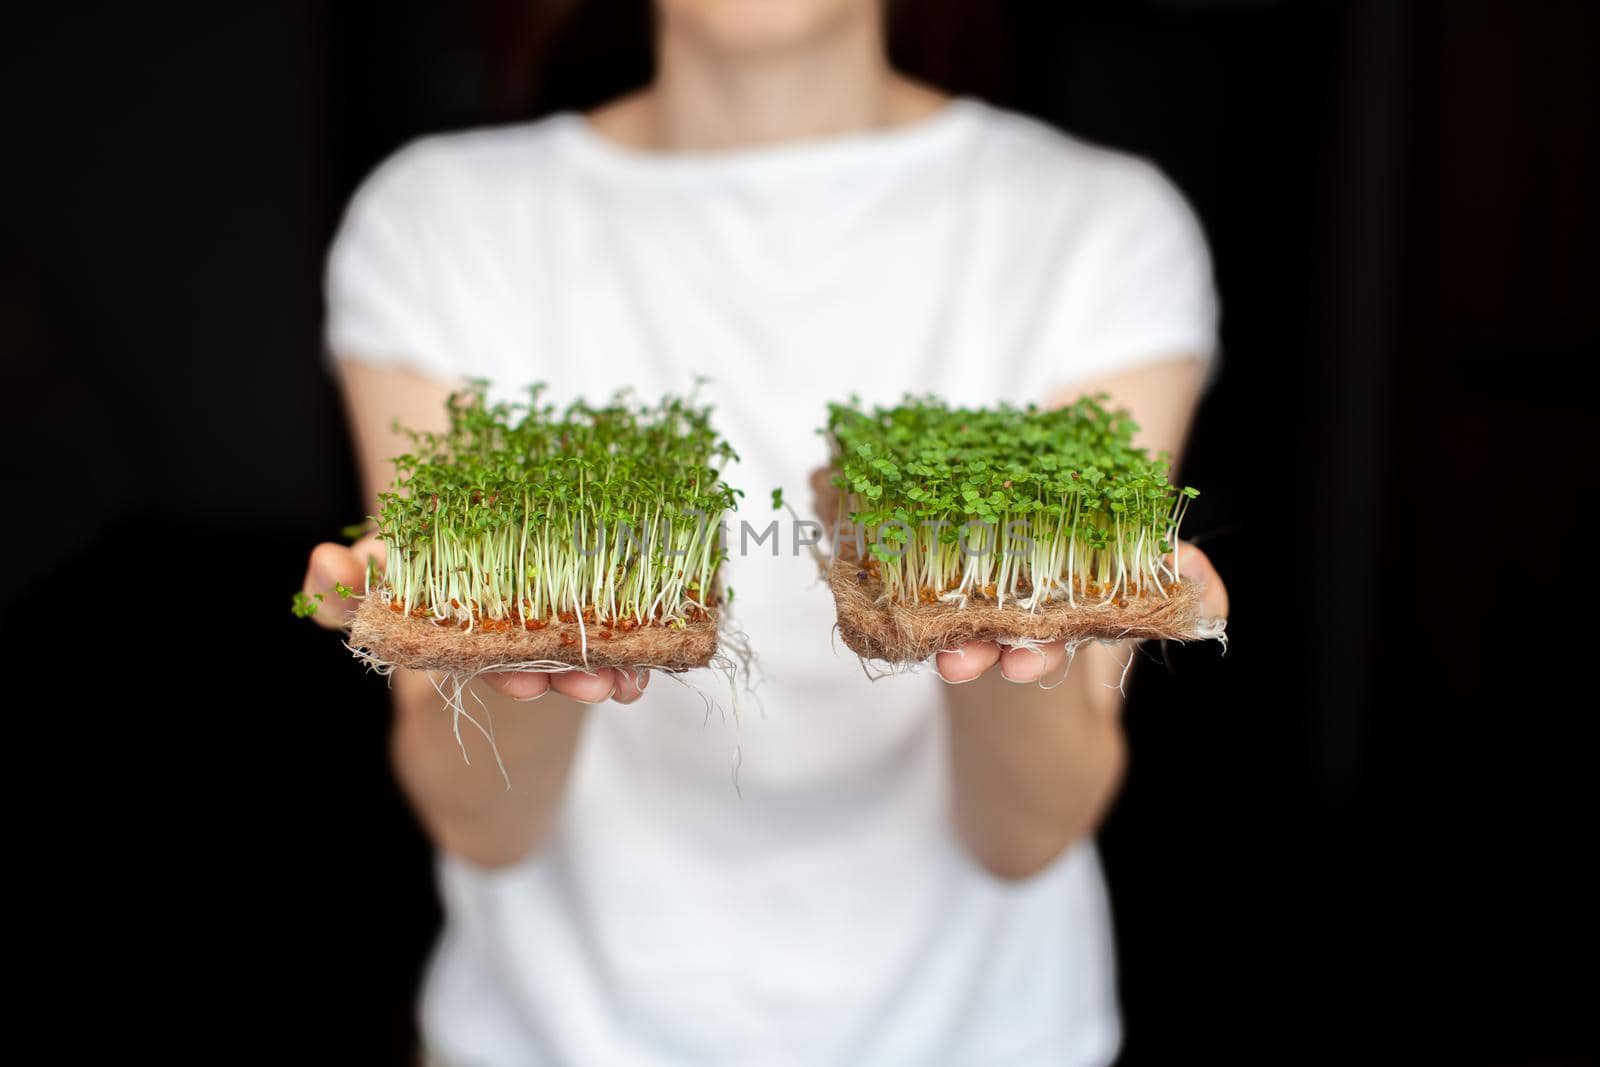 A woman holds micro greens grown at home in her hands. Micro-greens by AnatoliiFoto